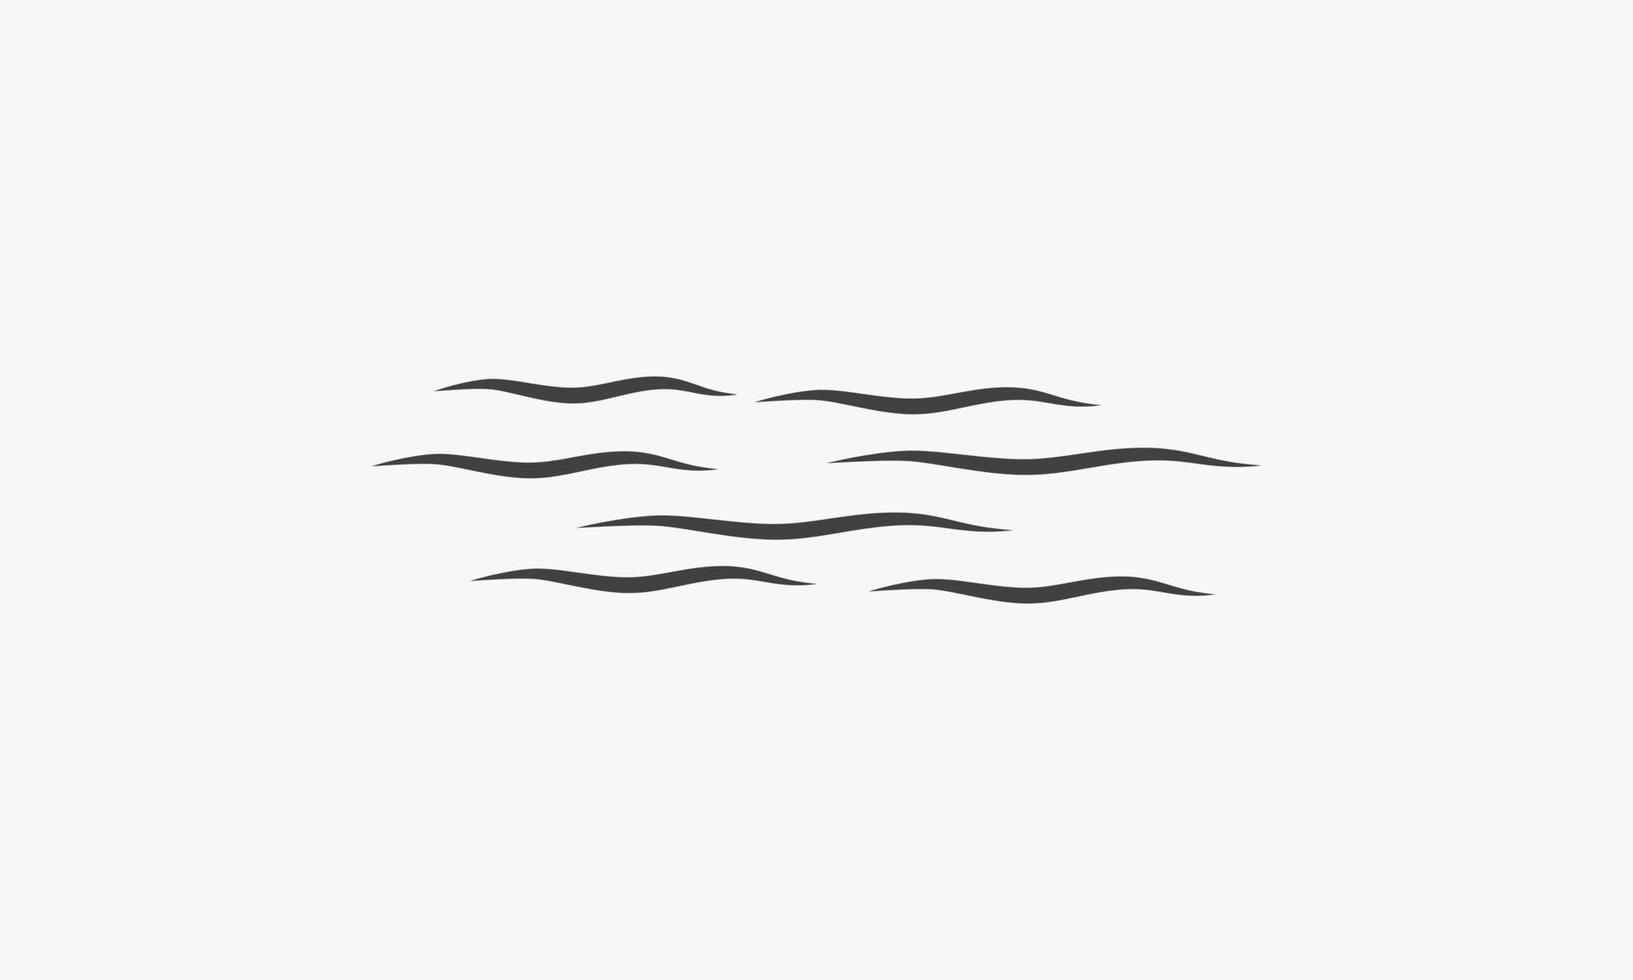 sea icon vector illustration. isolated on white background.